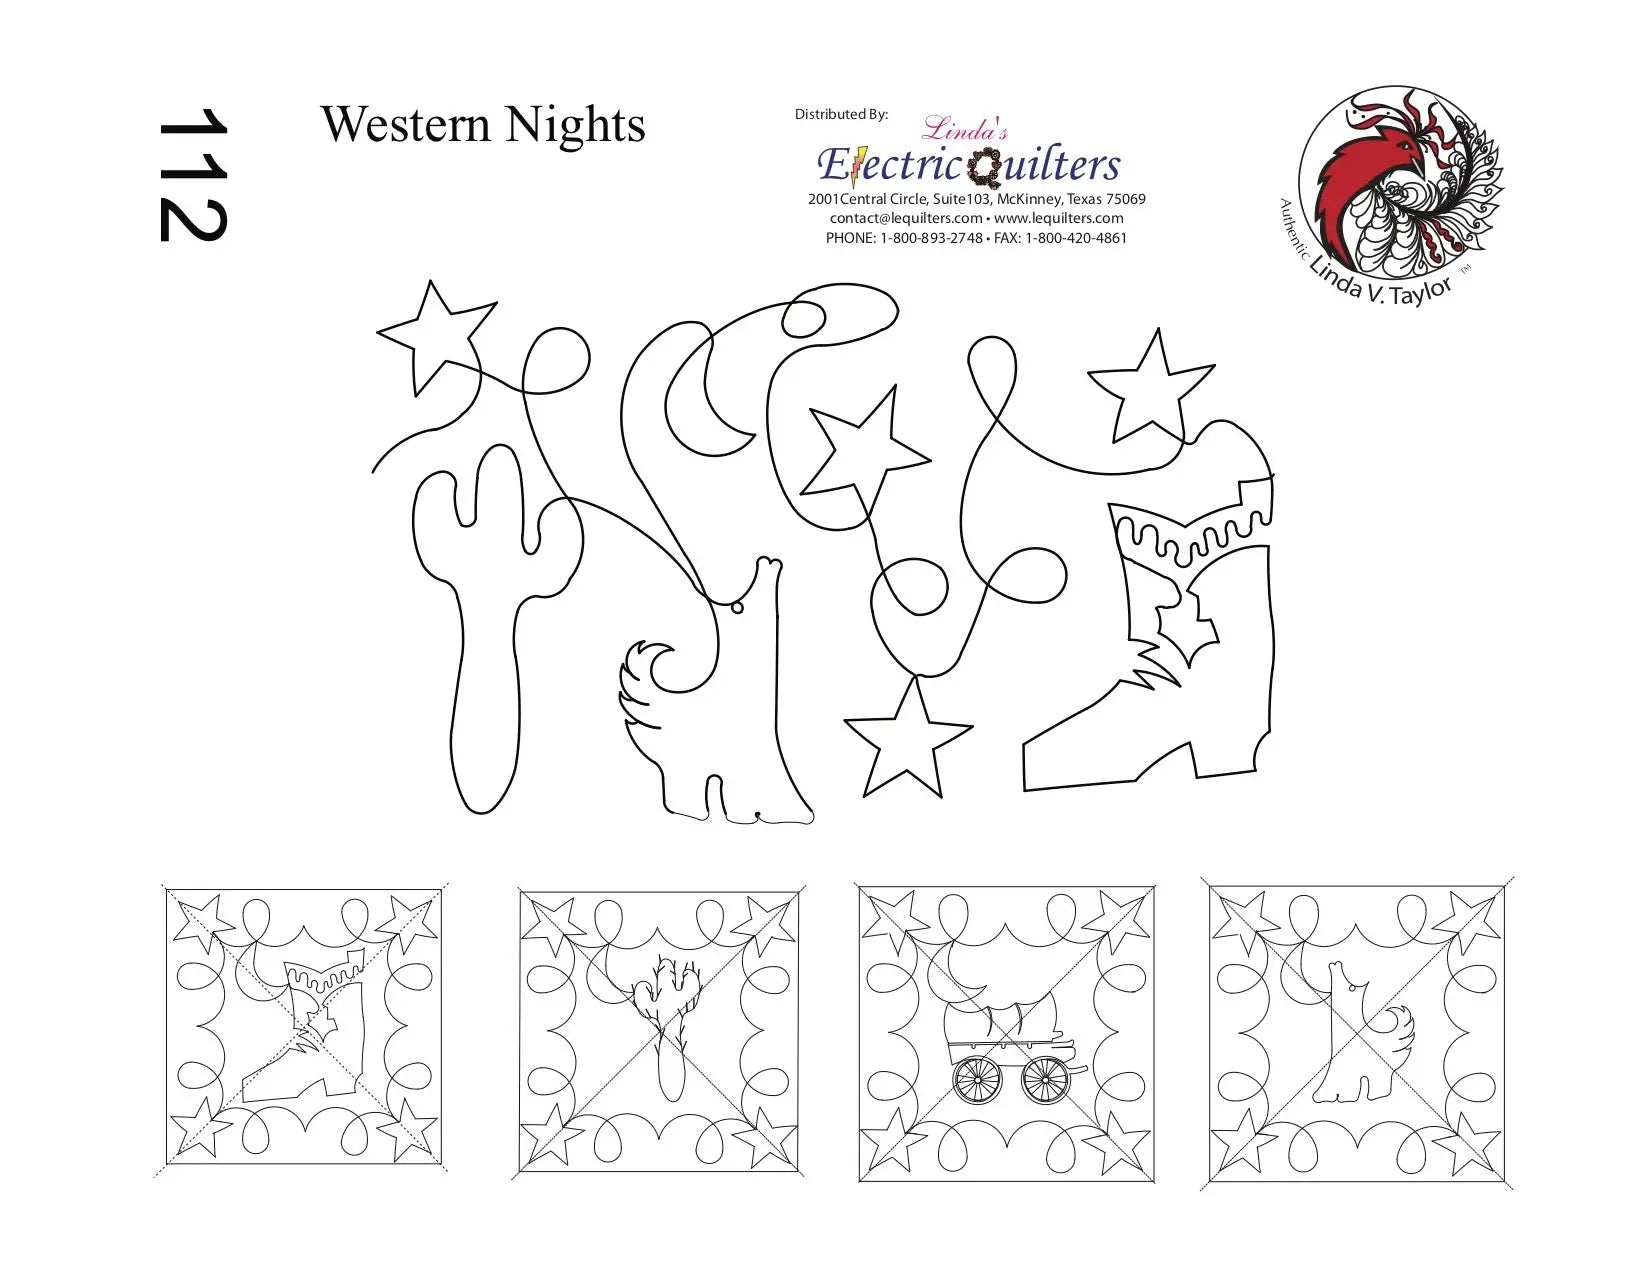 112 Western Nights Pantograph by Linda V. Taylor - Linda's Electric Quilters